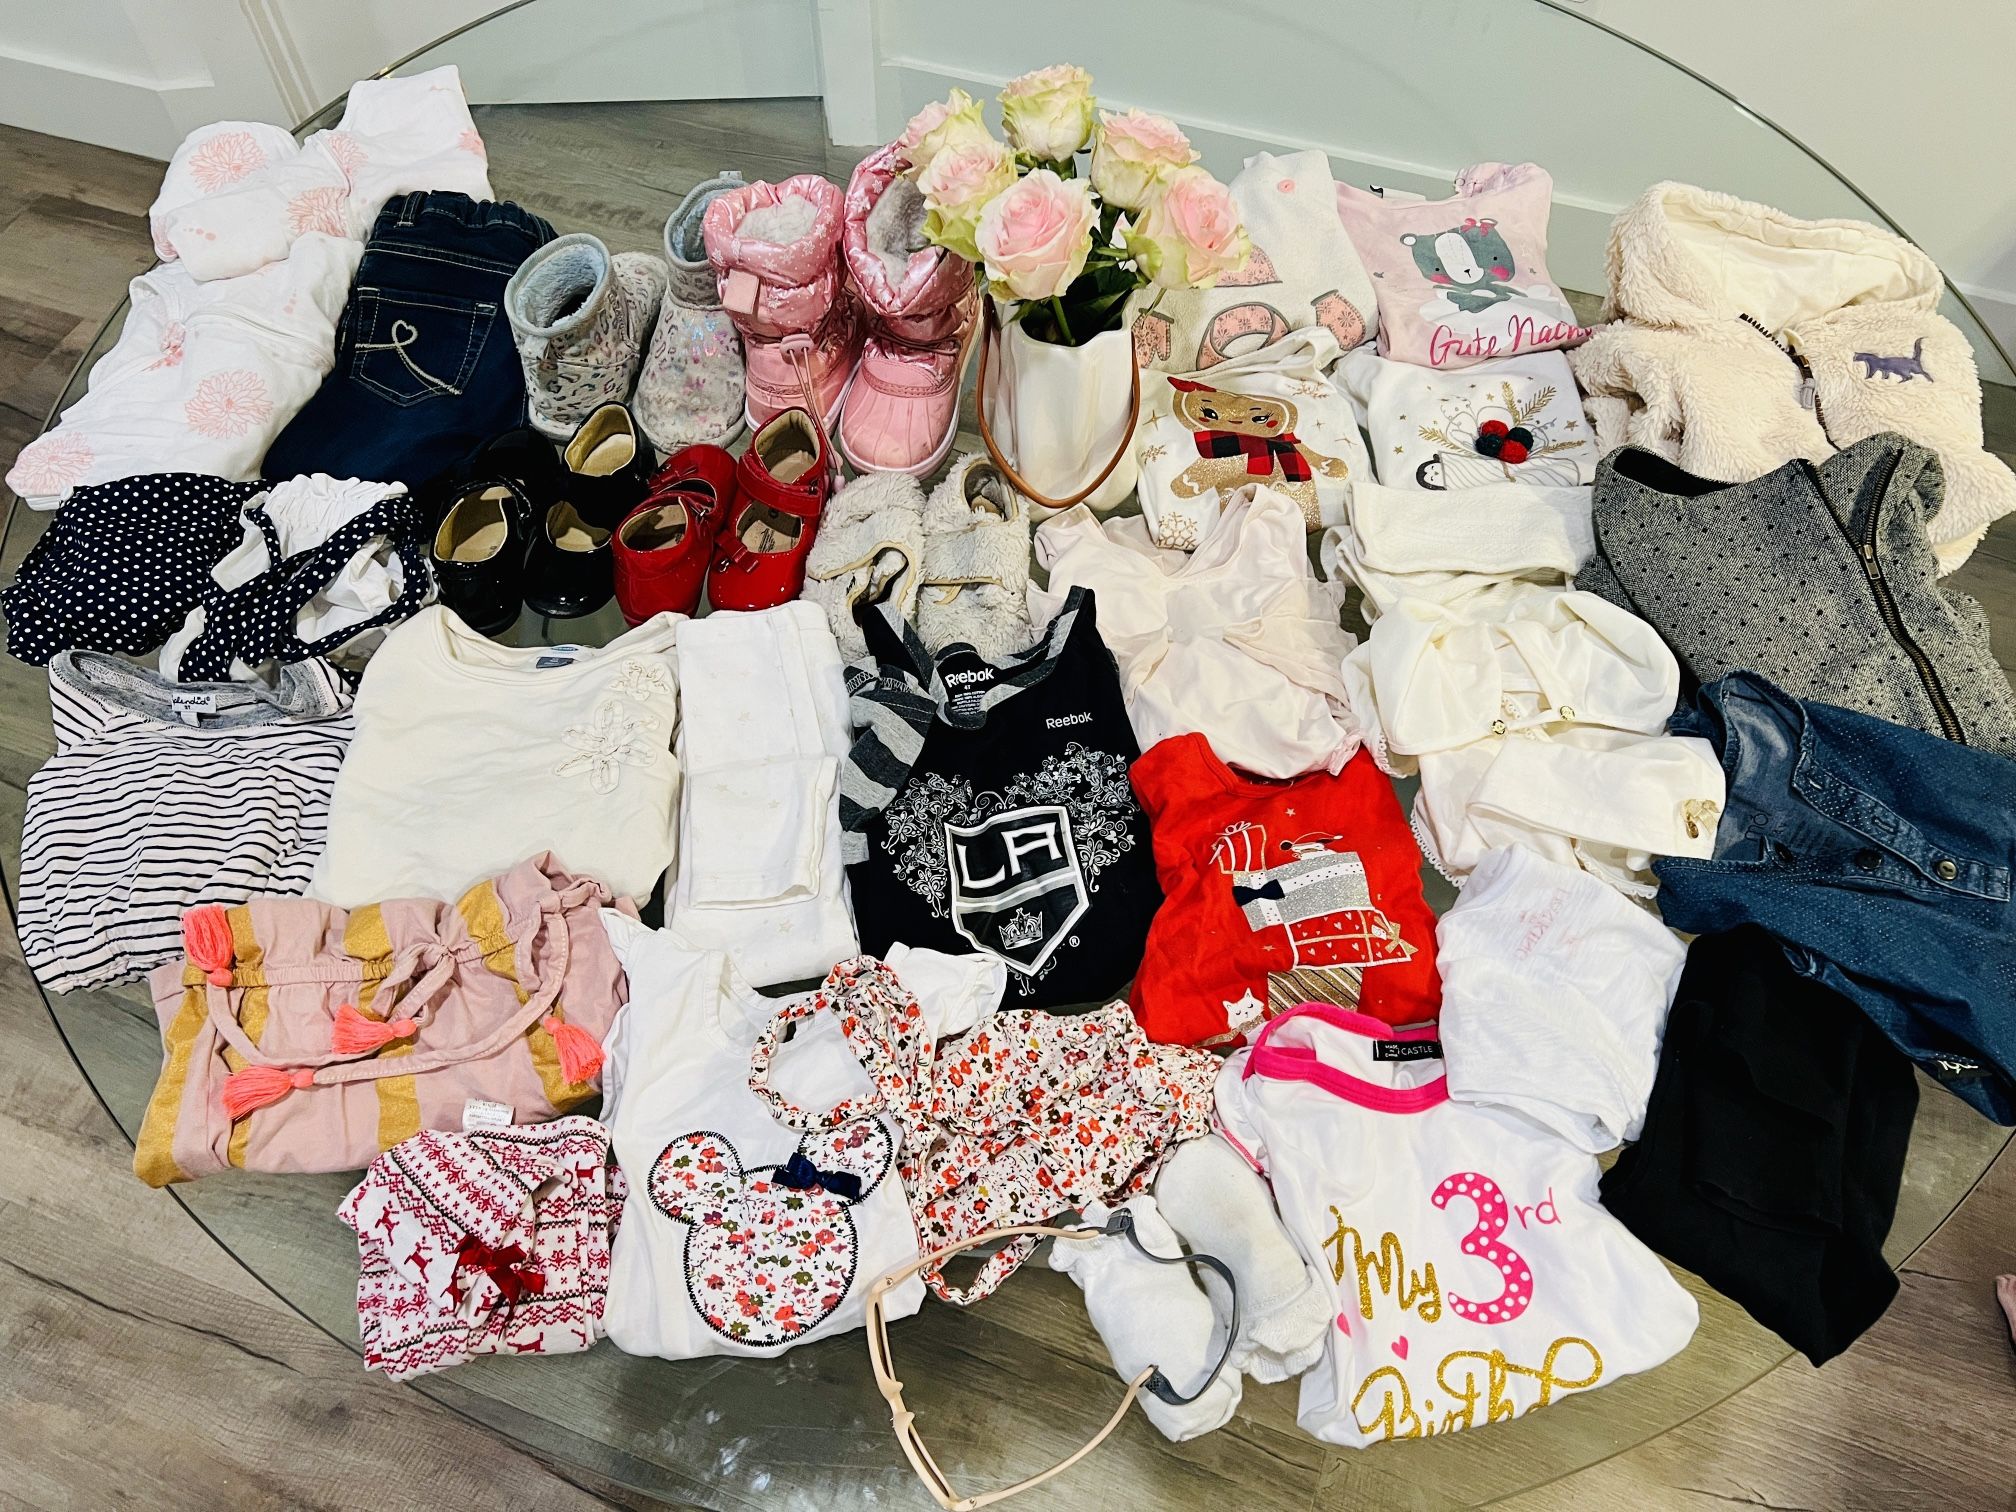 36 piece bundle of girl’s 3T clothing and shoes (7/8/9)